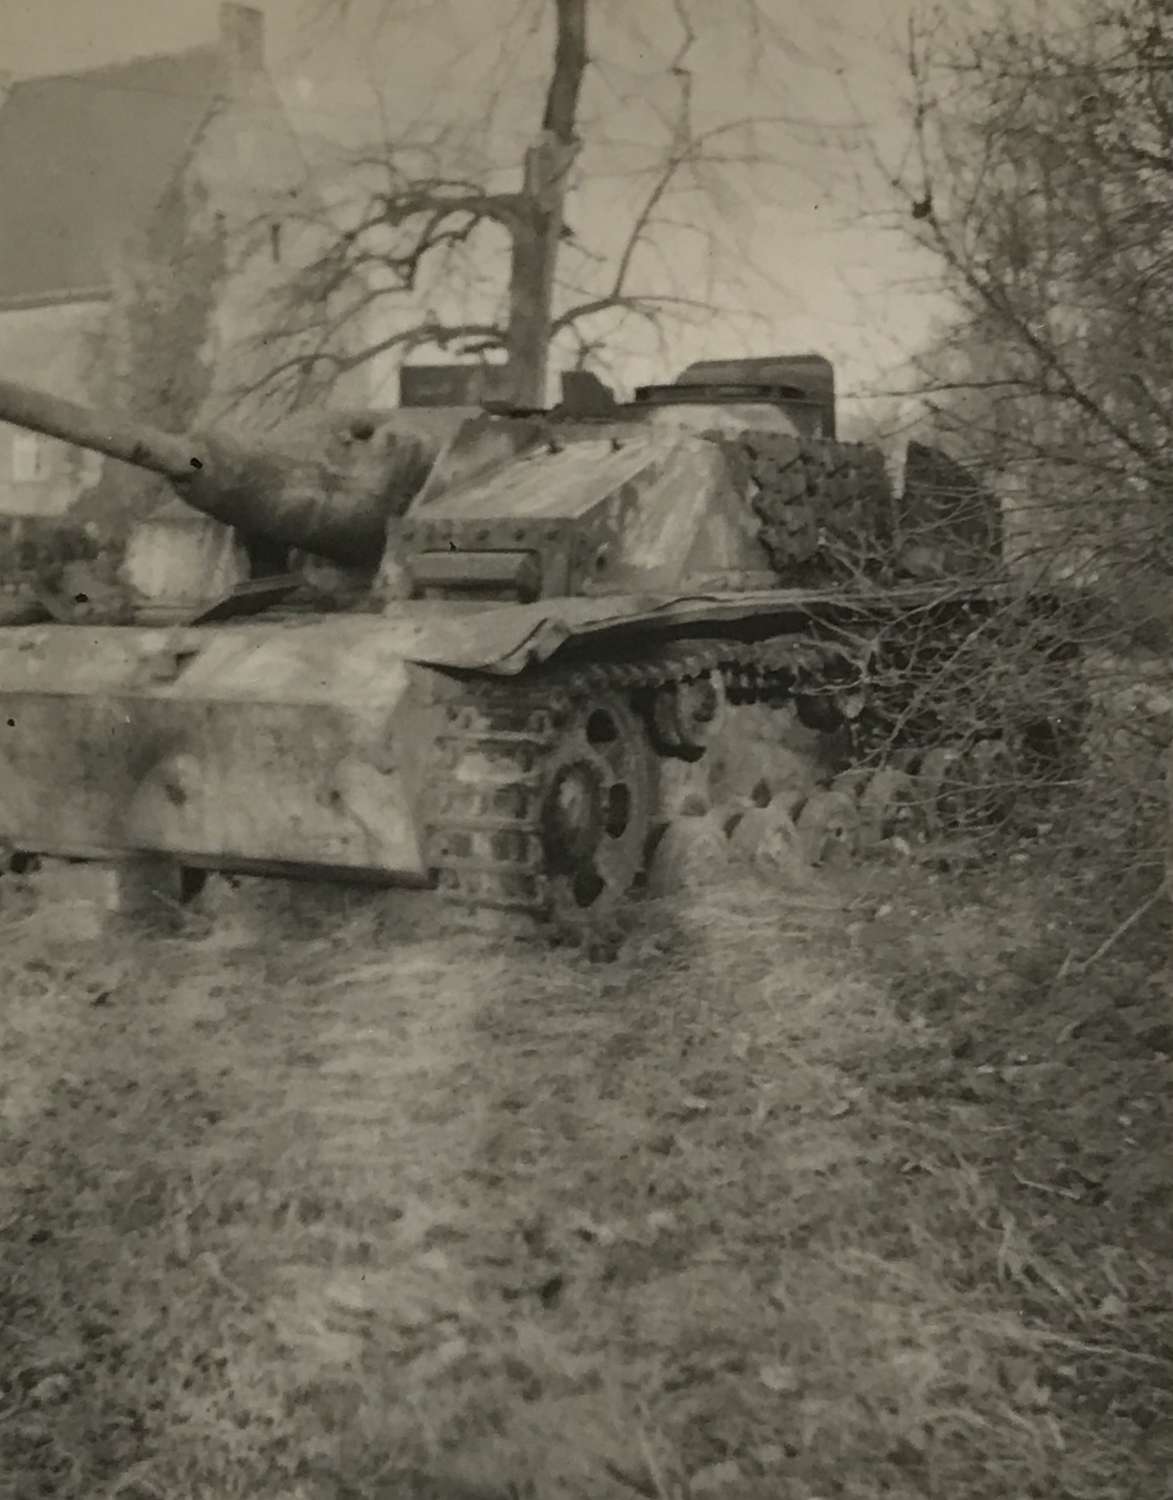 A small private photograph of a knocked out STUG assault gun